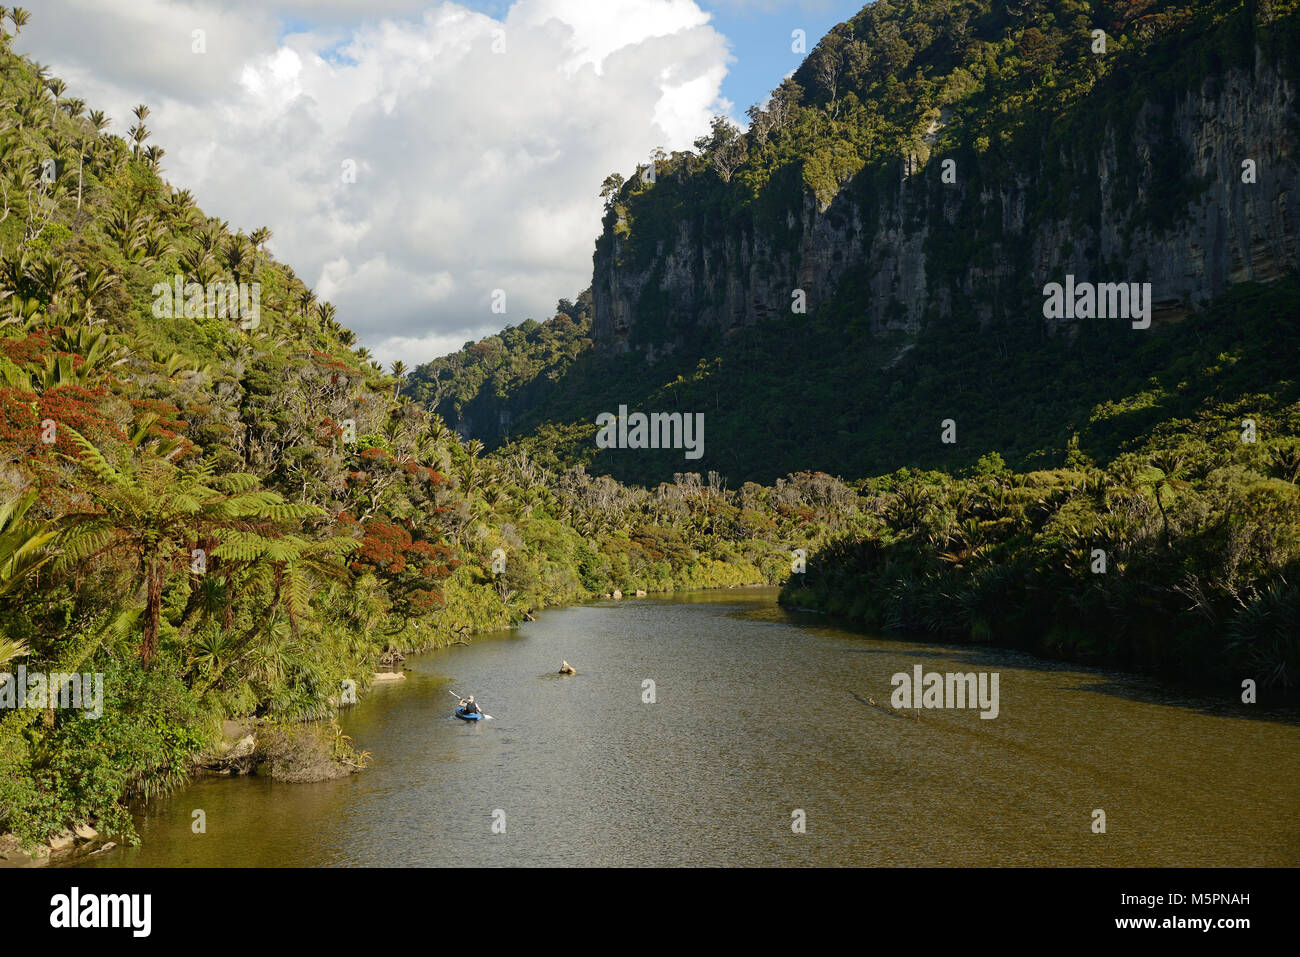 A man in a slalom kayak checks out a New Zealand stream as it flows through a patch of rata and nikau forest near Punakaiki Stock Photo